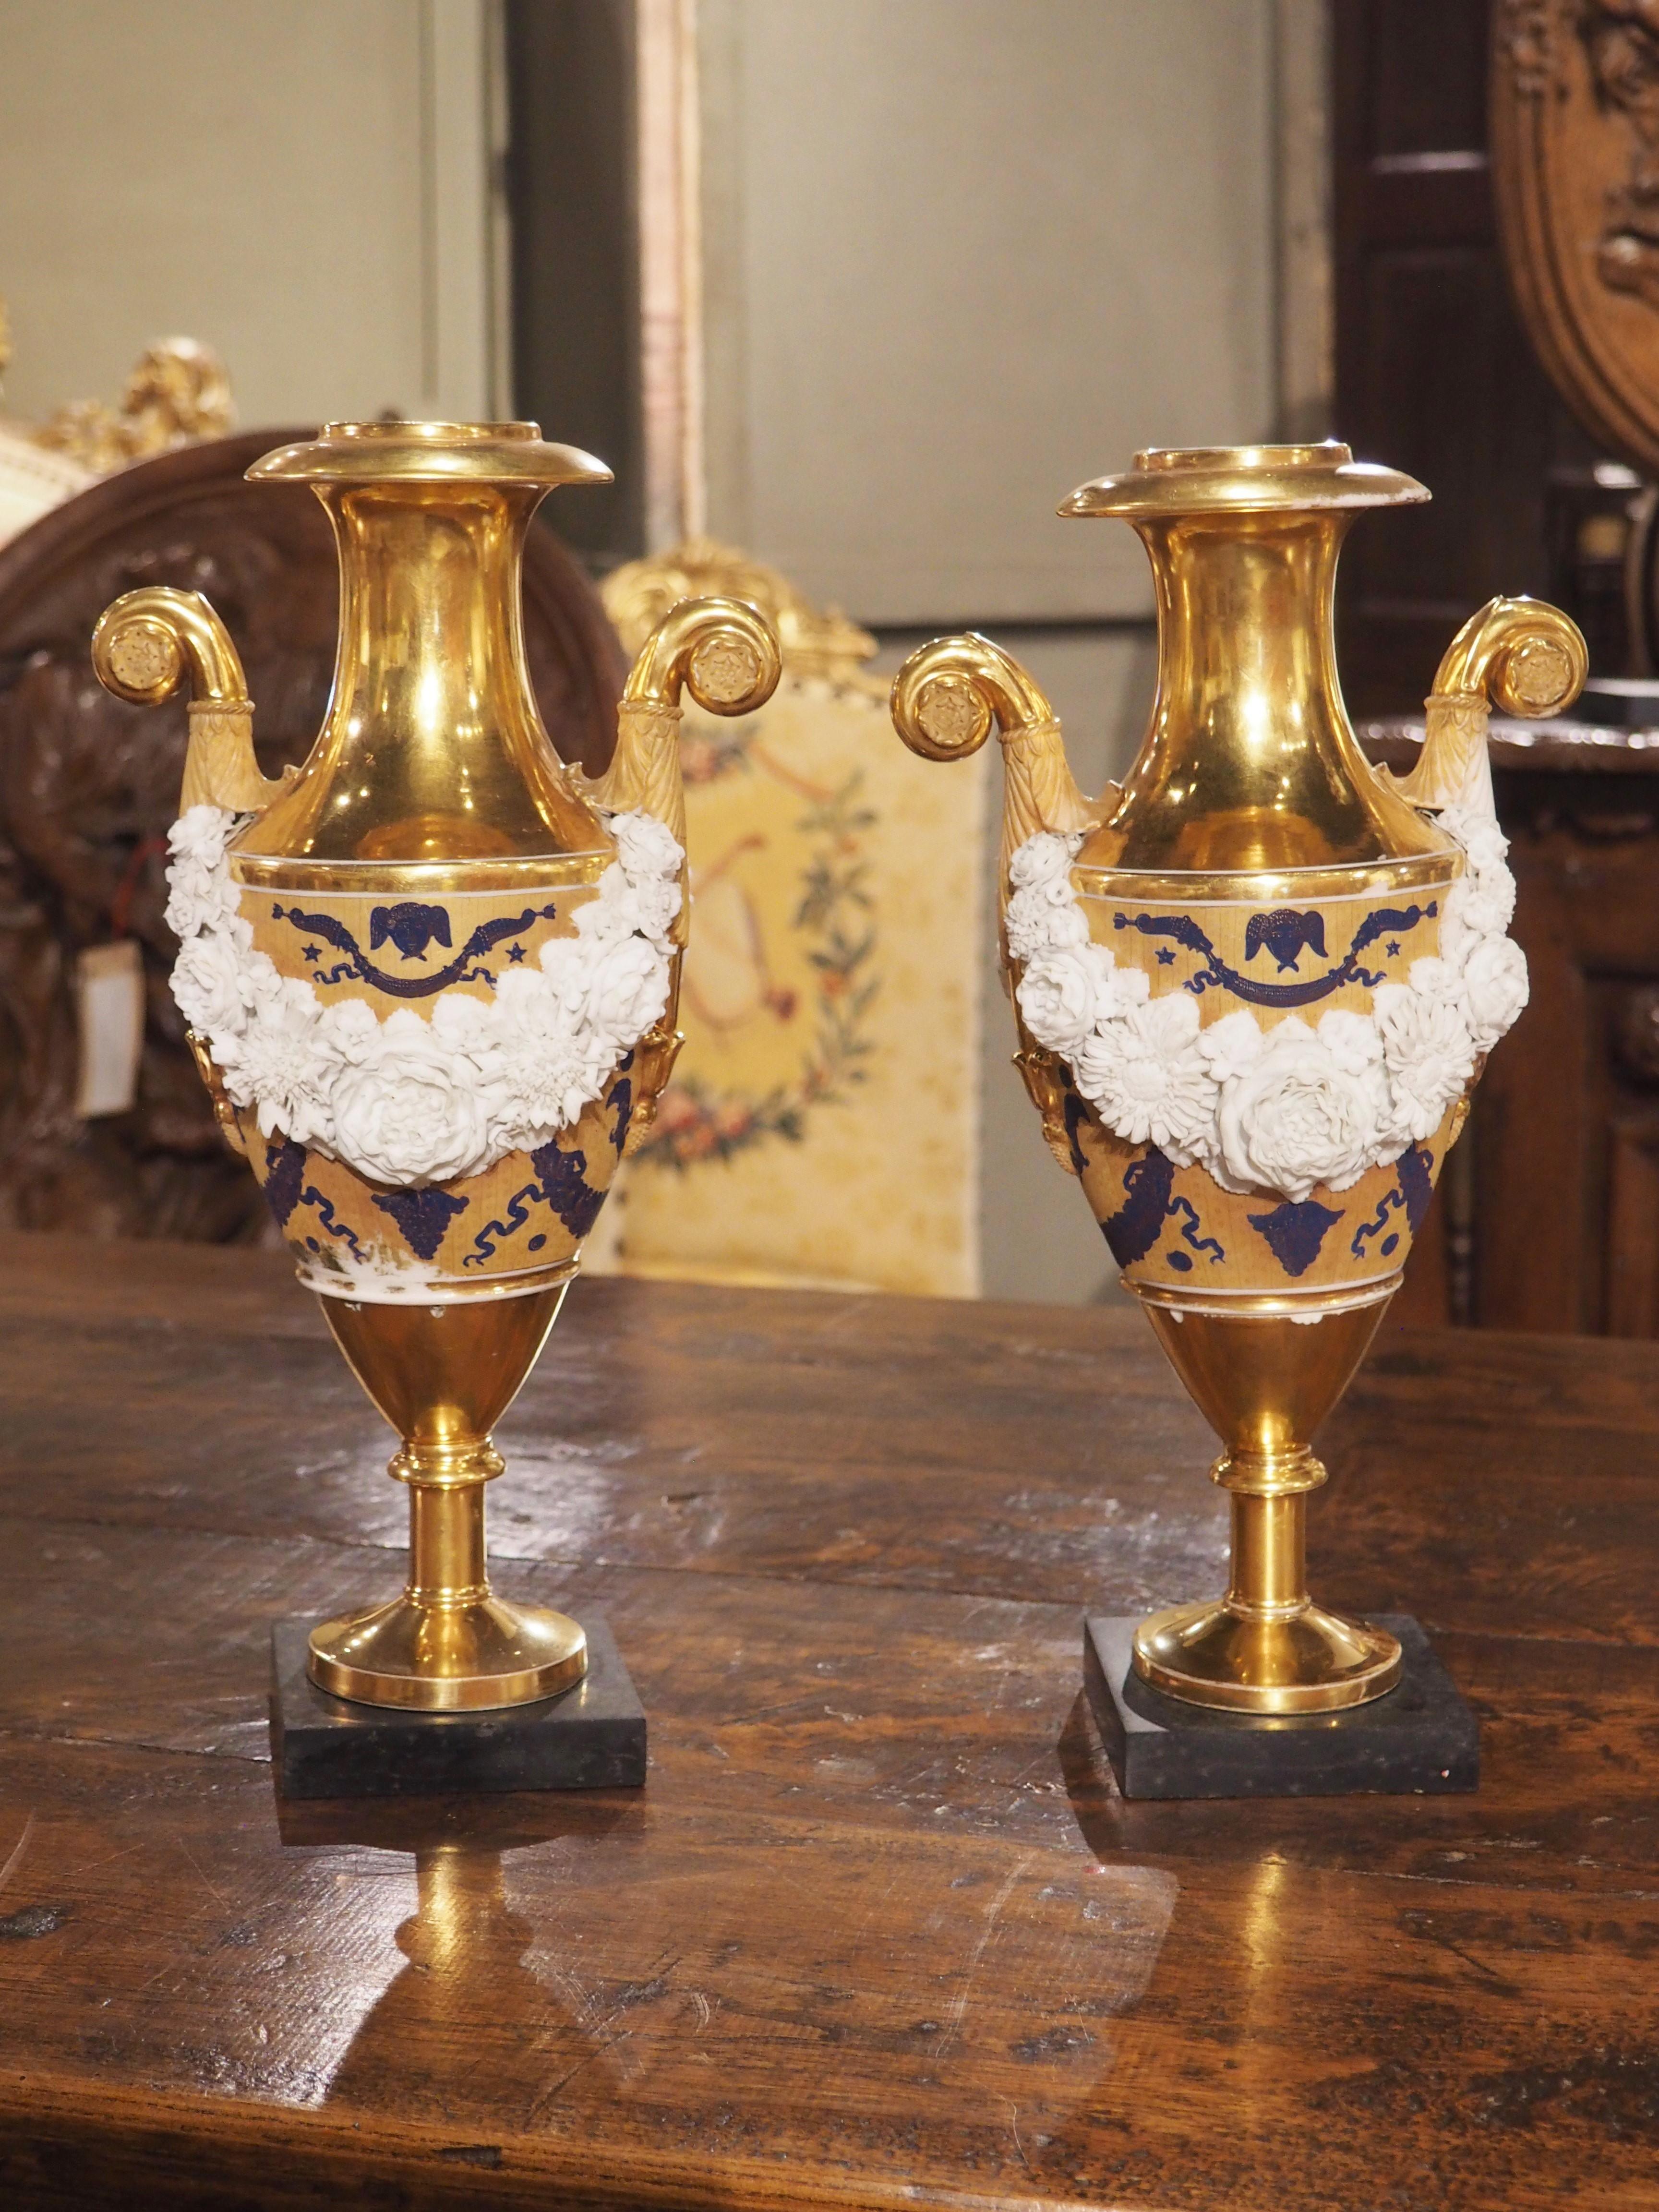 With its Neoclassical elements, this pair of French porcelain vases is in the style of Louis XVI. Crafted circa 1870, the stunning details of the swags are sharpened by the rich coloration of the hand painted elements and gilding.

The upper